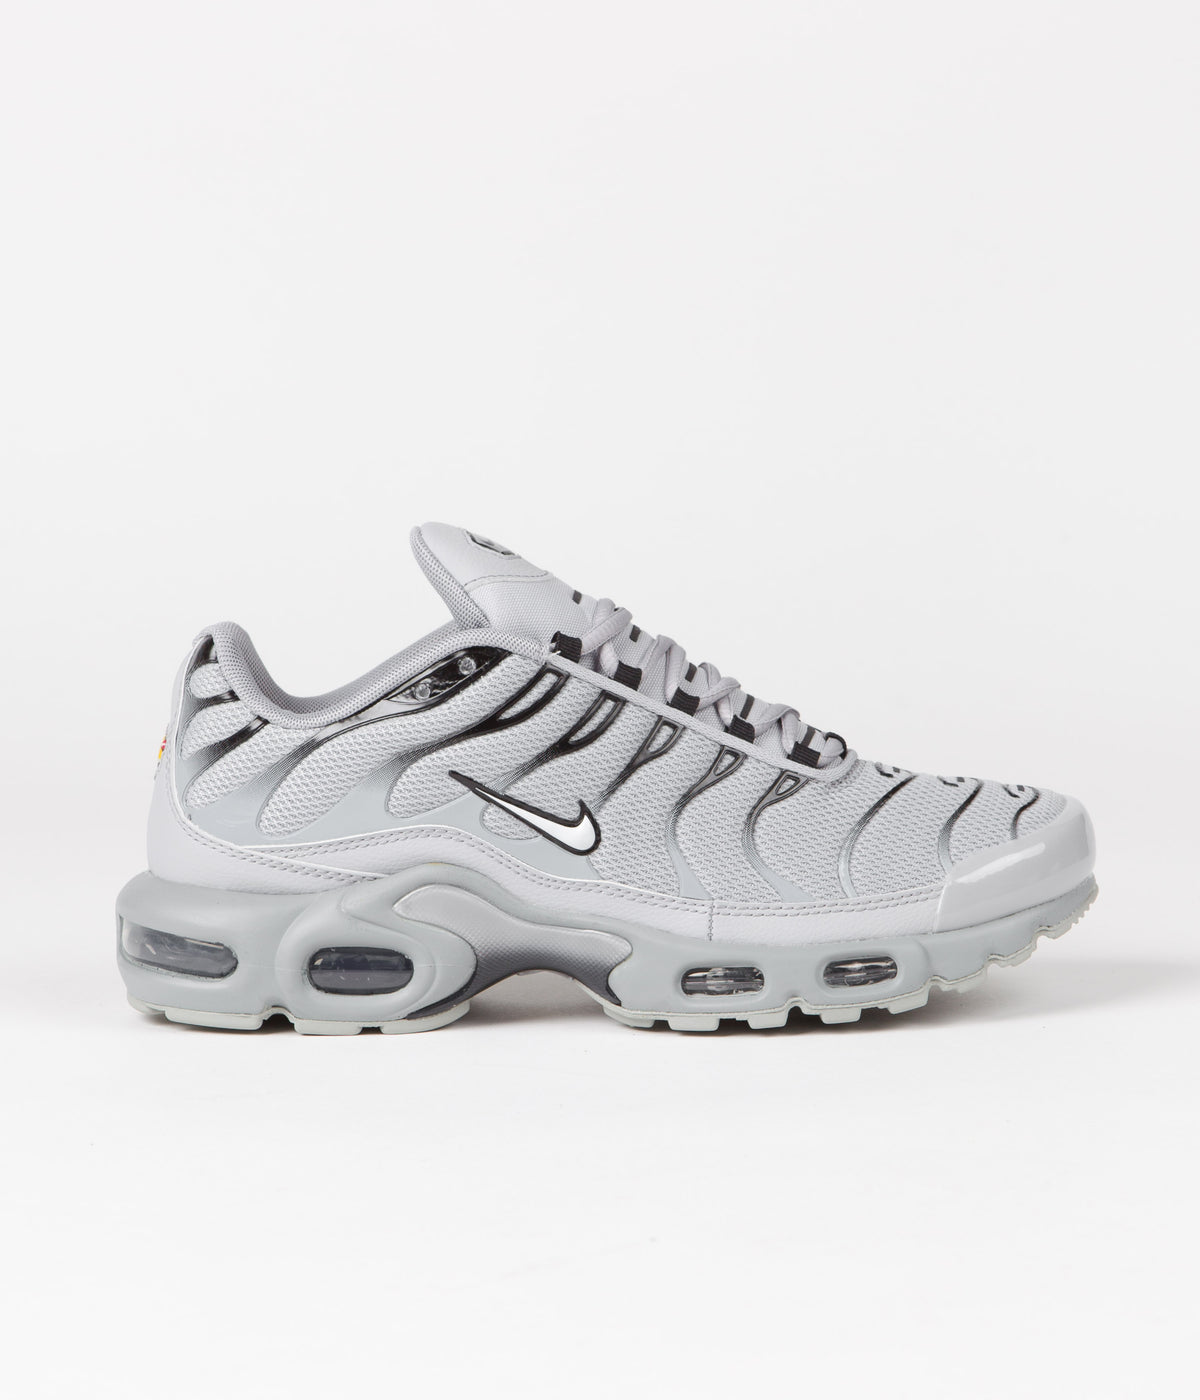 Nike Air Max Plus Shoes - Wolf Grey / White - Black | Always In Colour